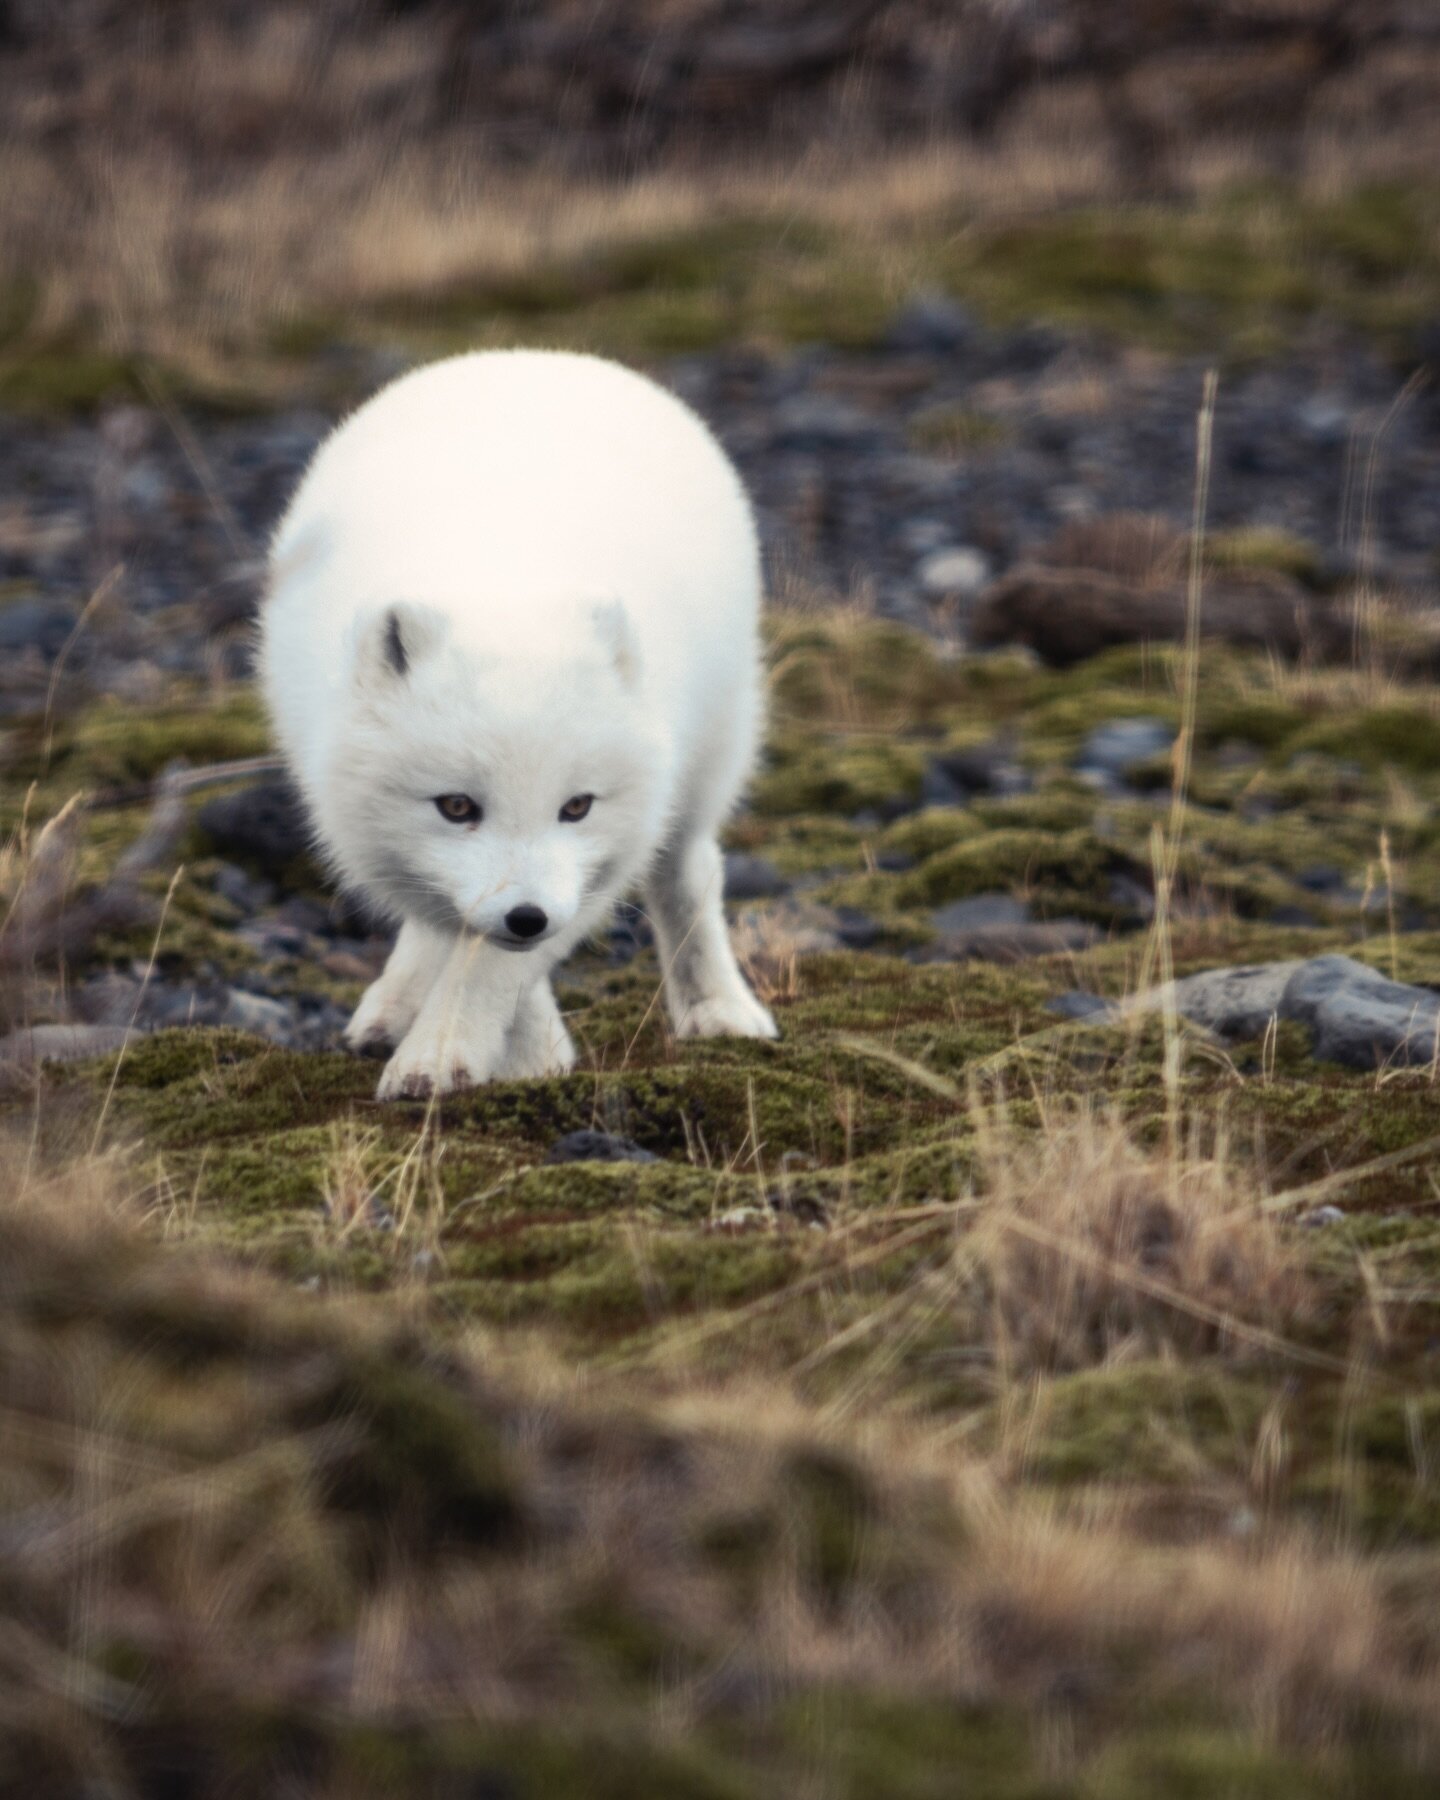 Her majesty ARCTIC FOX spotted in Thorsmork, Iceland.

They&rsquo;re usually living in  the Westfjords and Hornstrandir, where there&rsquo;s planty of food, with birds, eggs and fresh meat. The artic fox is the only native mammals in Iceland, coming 